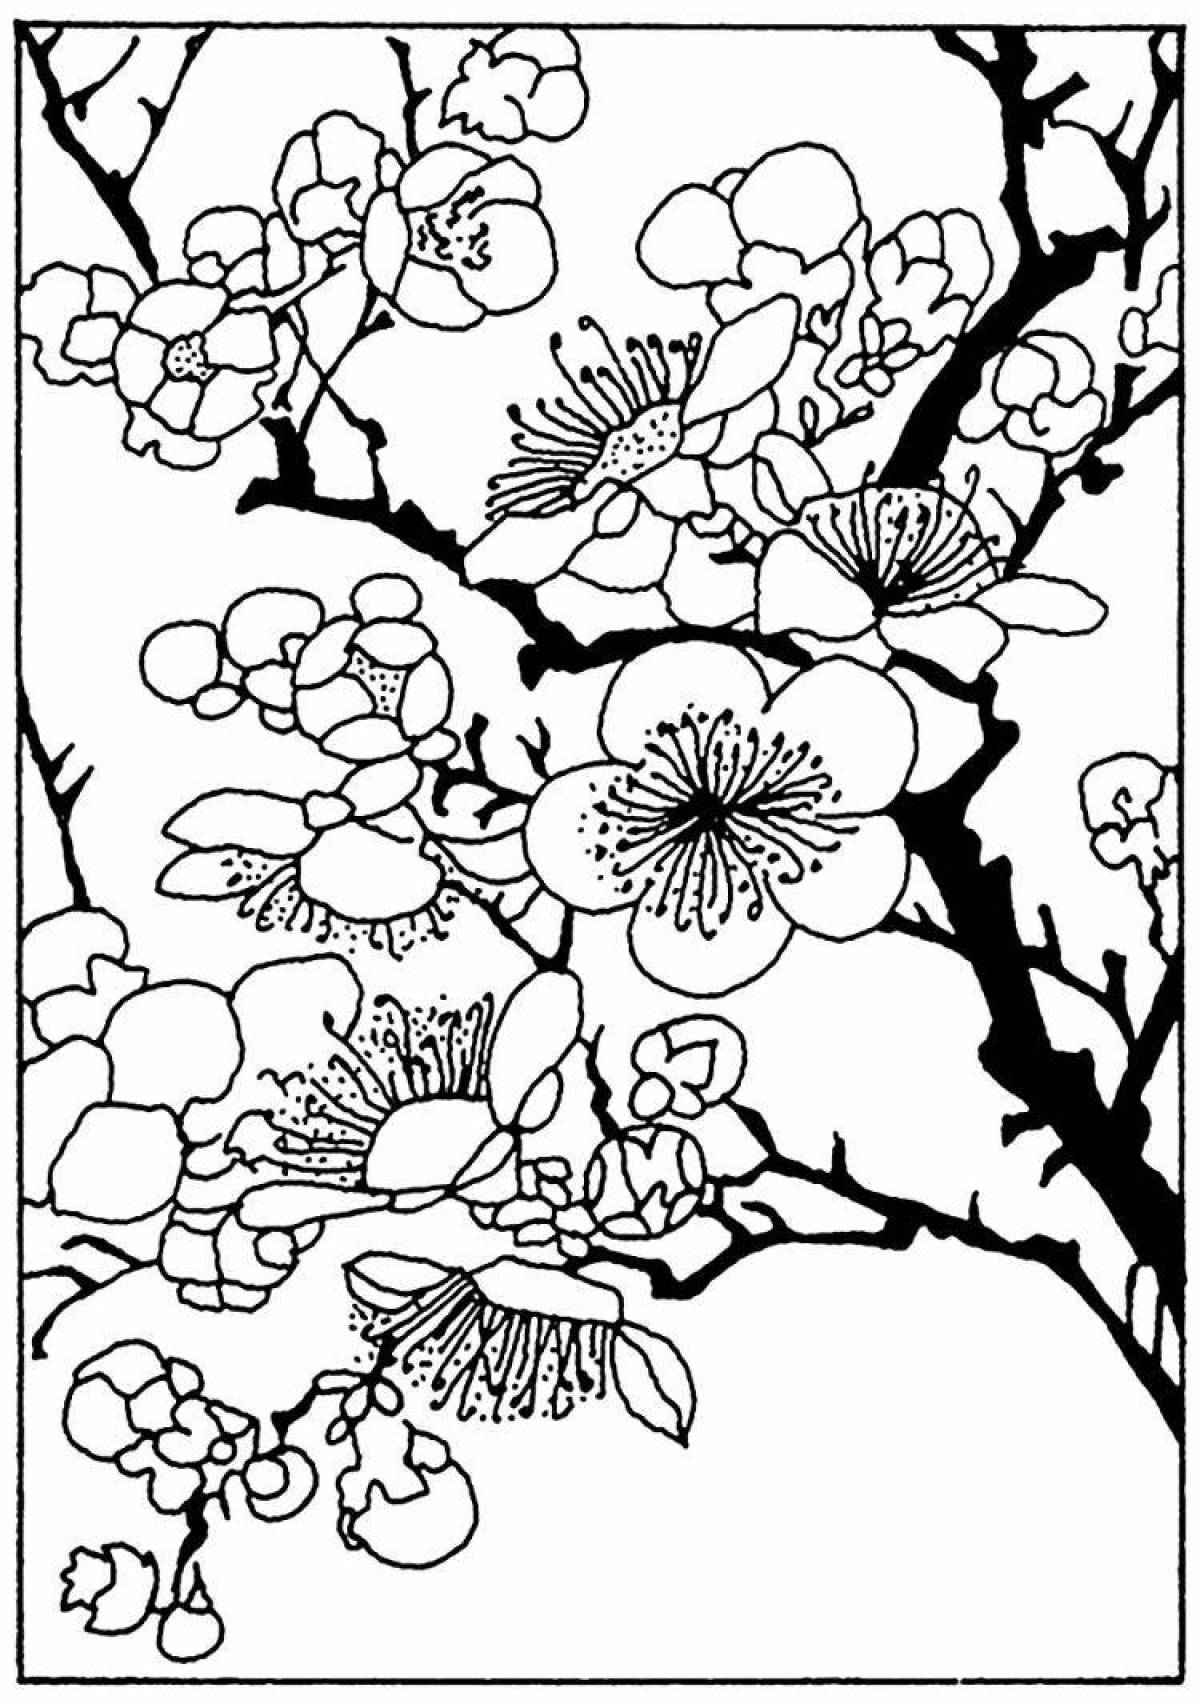 Delightful japanese tree coloring page